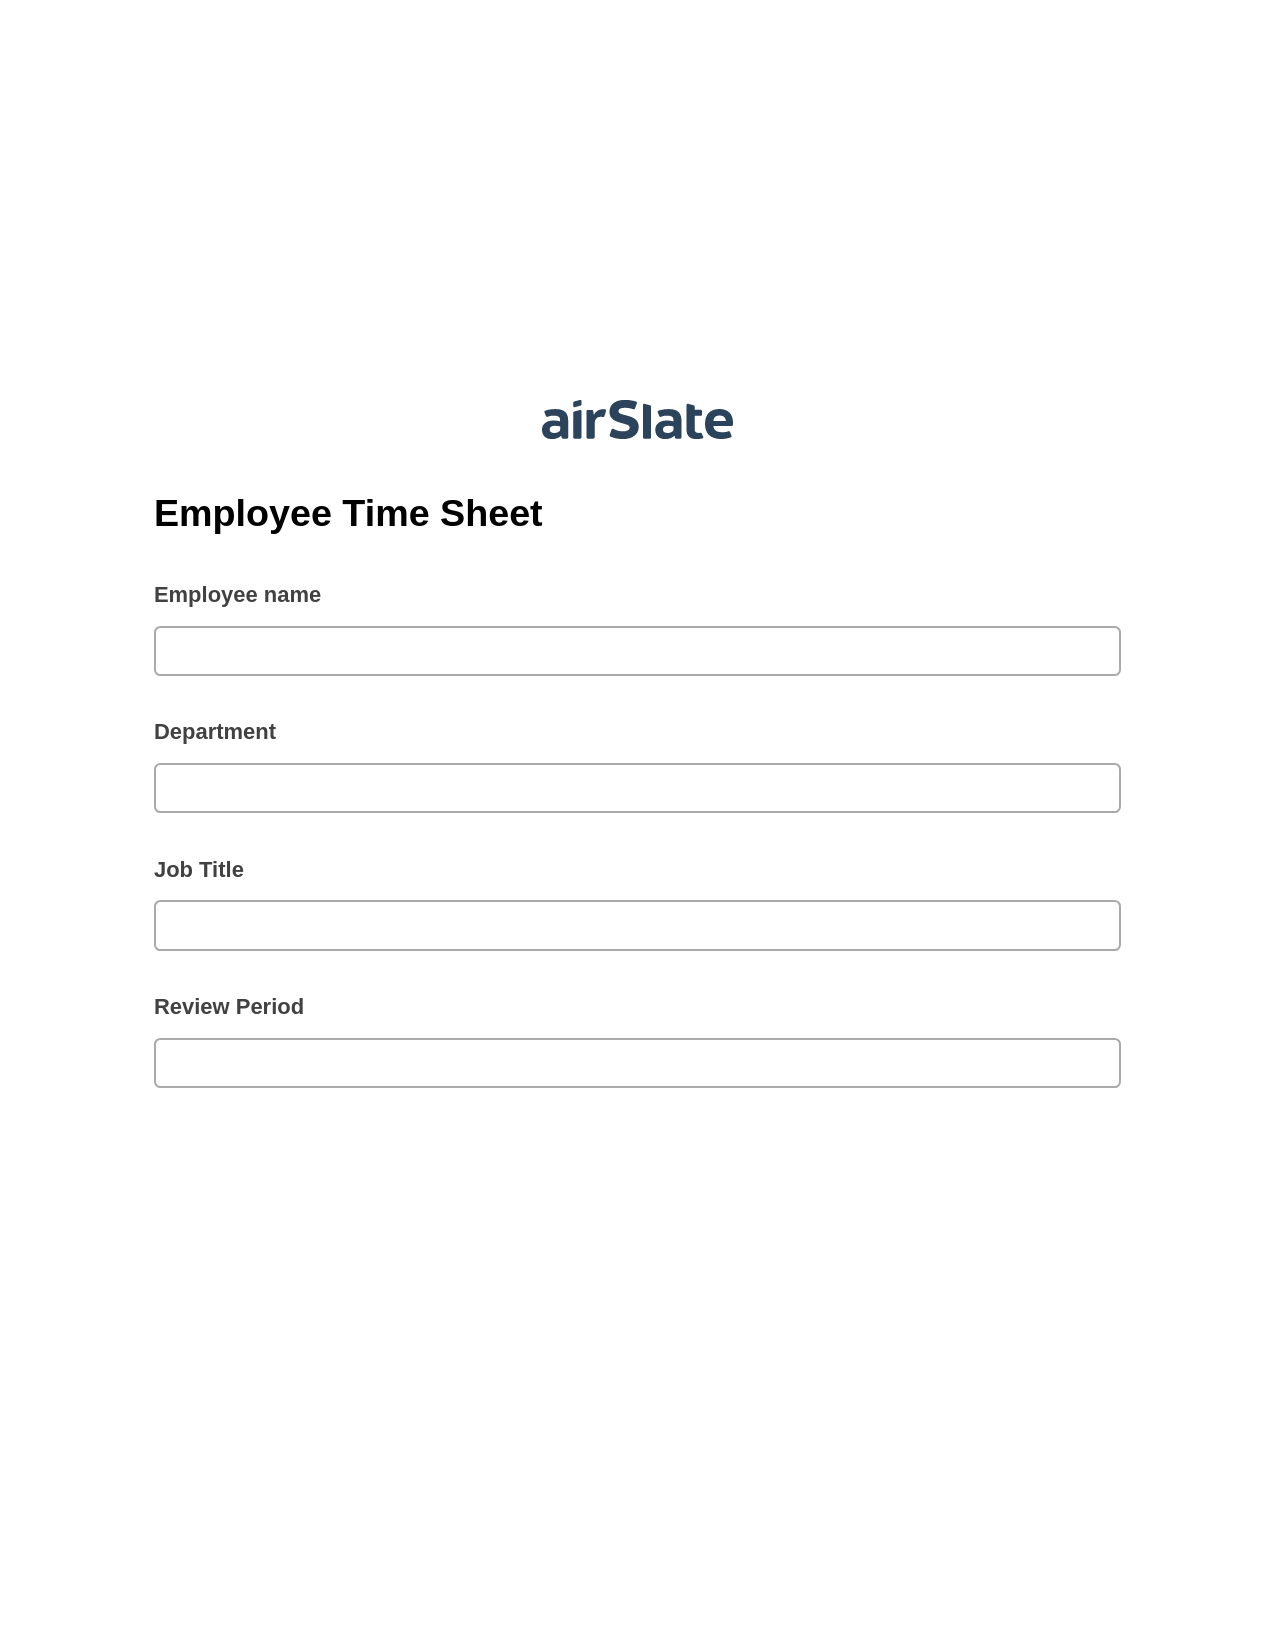 Multirole Employee Time Sheet Pre-fill from another Slate Bot, Update Audit Trail Bot, Export to Salesforce Record Bot